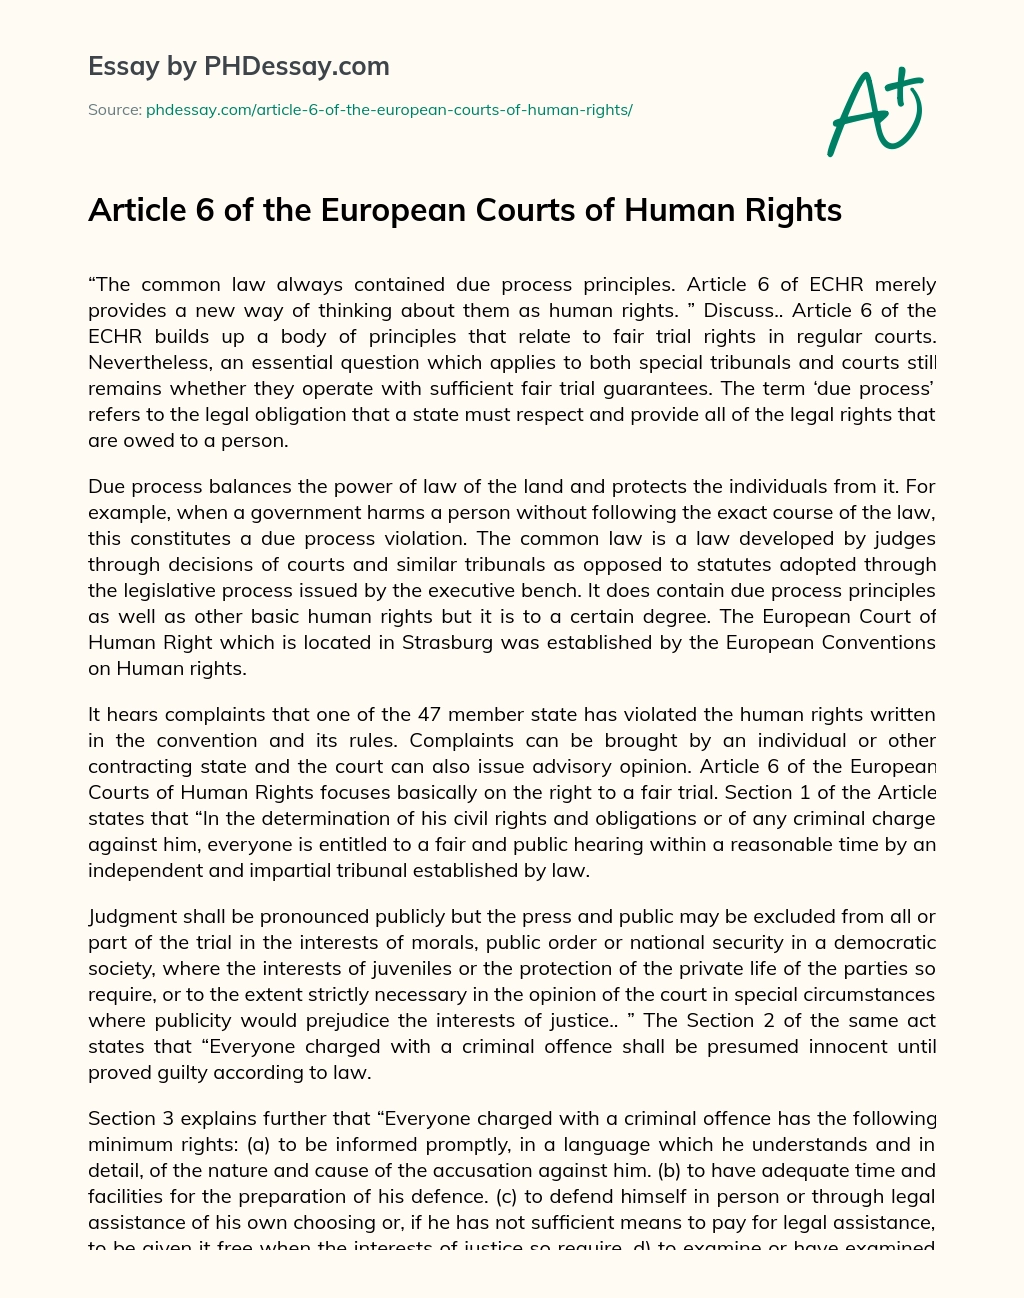 Article 6 of the European Courts of Human Rights essay